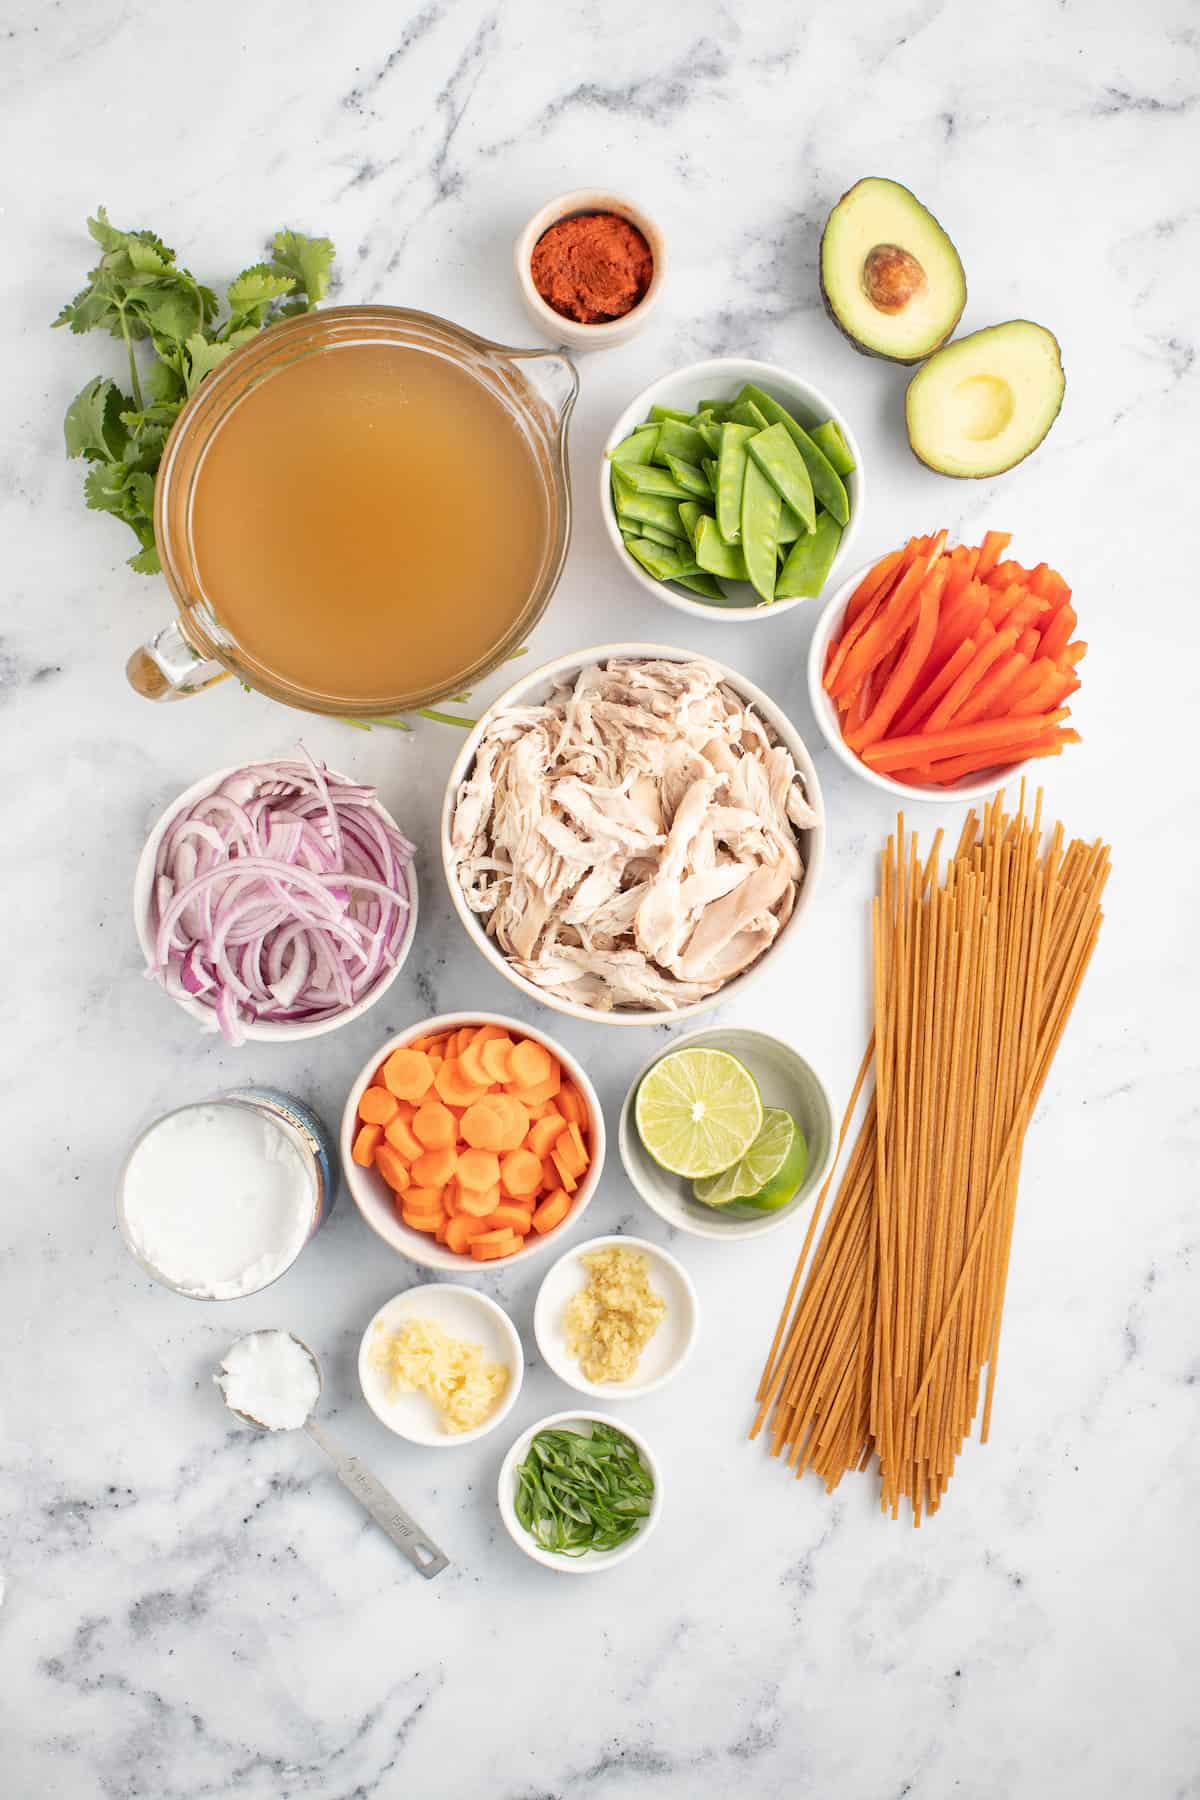 an ،ortment of ingredients on a countertop in small prep bowls like broth, sliced onions, snap peas, sliced peppers, carrots, limes, garlic, ،, and noodles